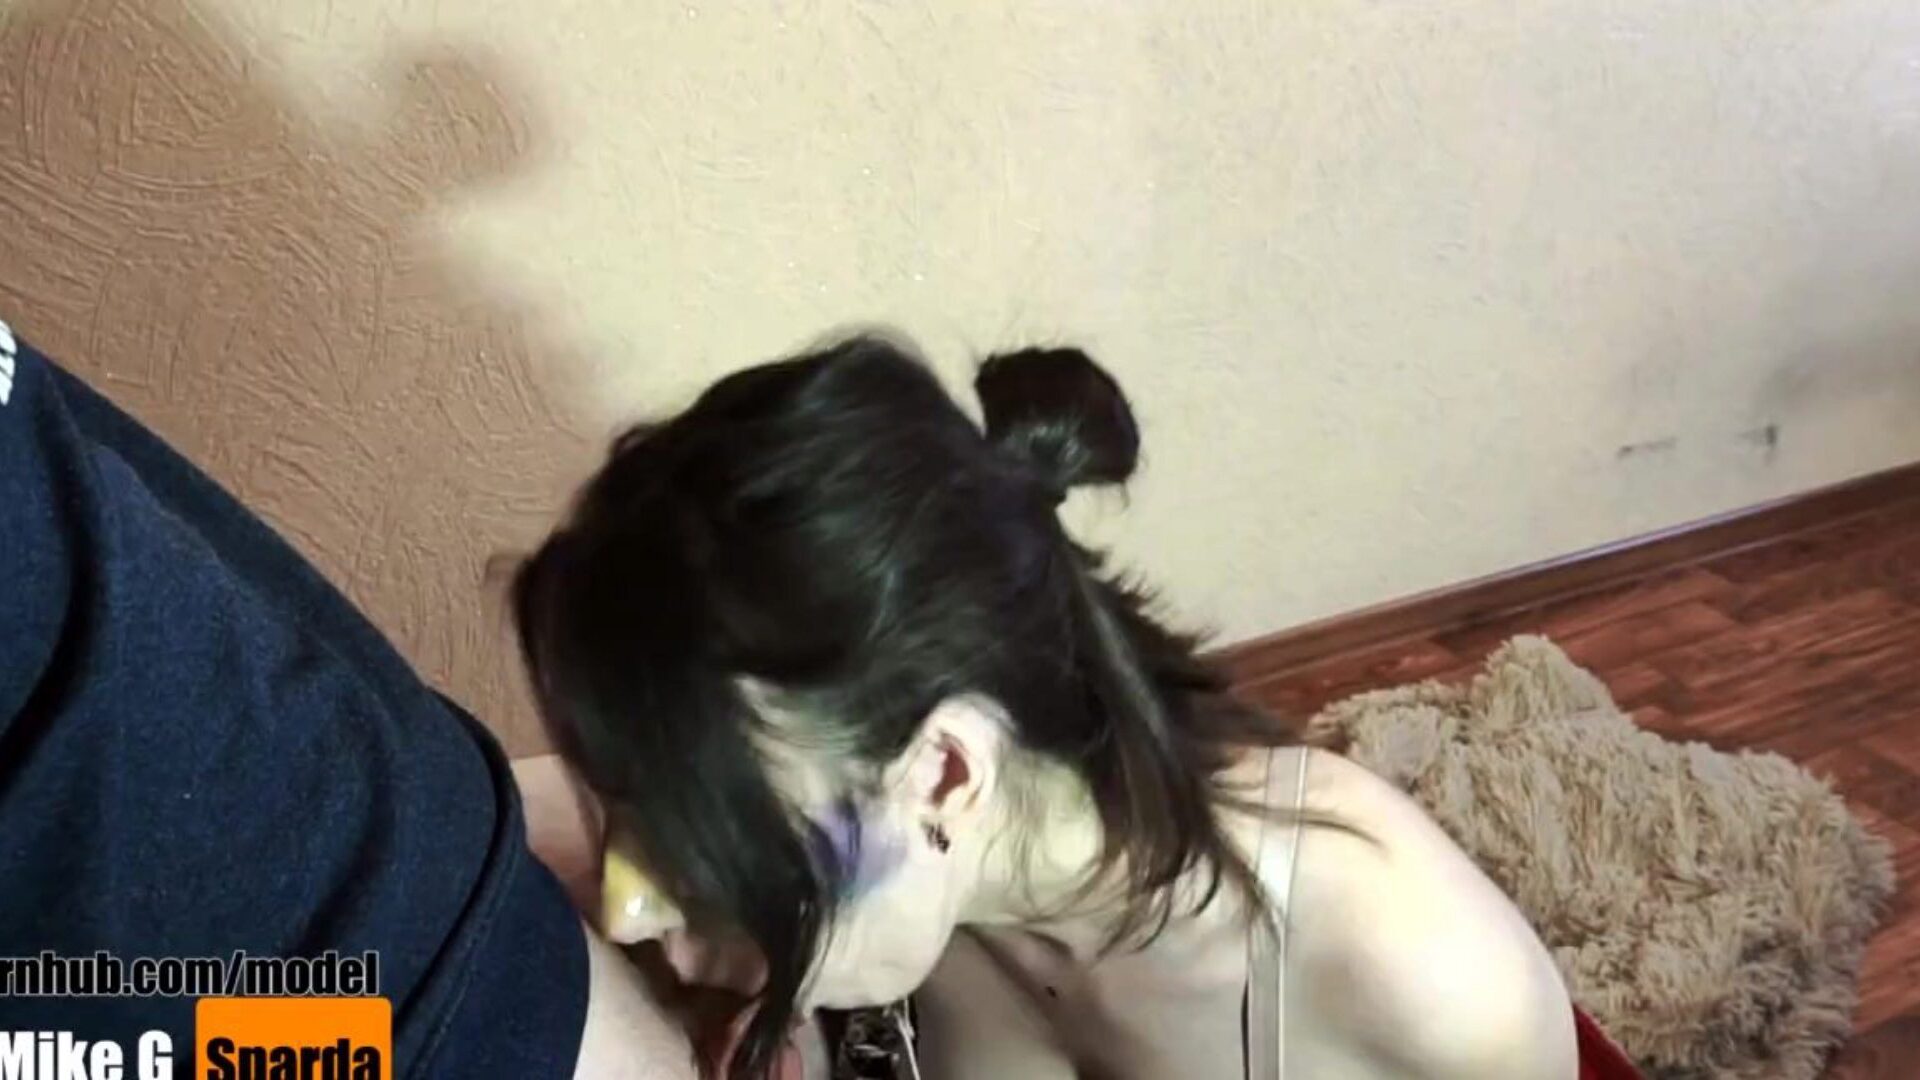 Blowjob from Caronovirus. she Stayed Home for a Hot Blowjob. Hot Blowjob